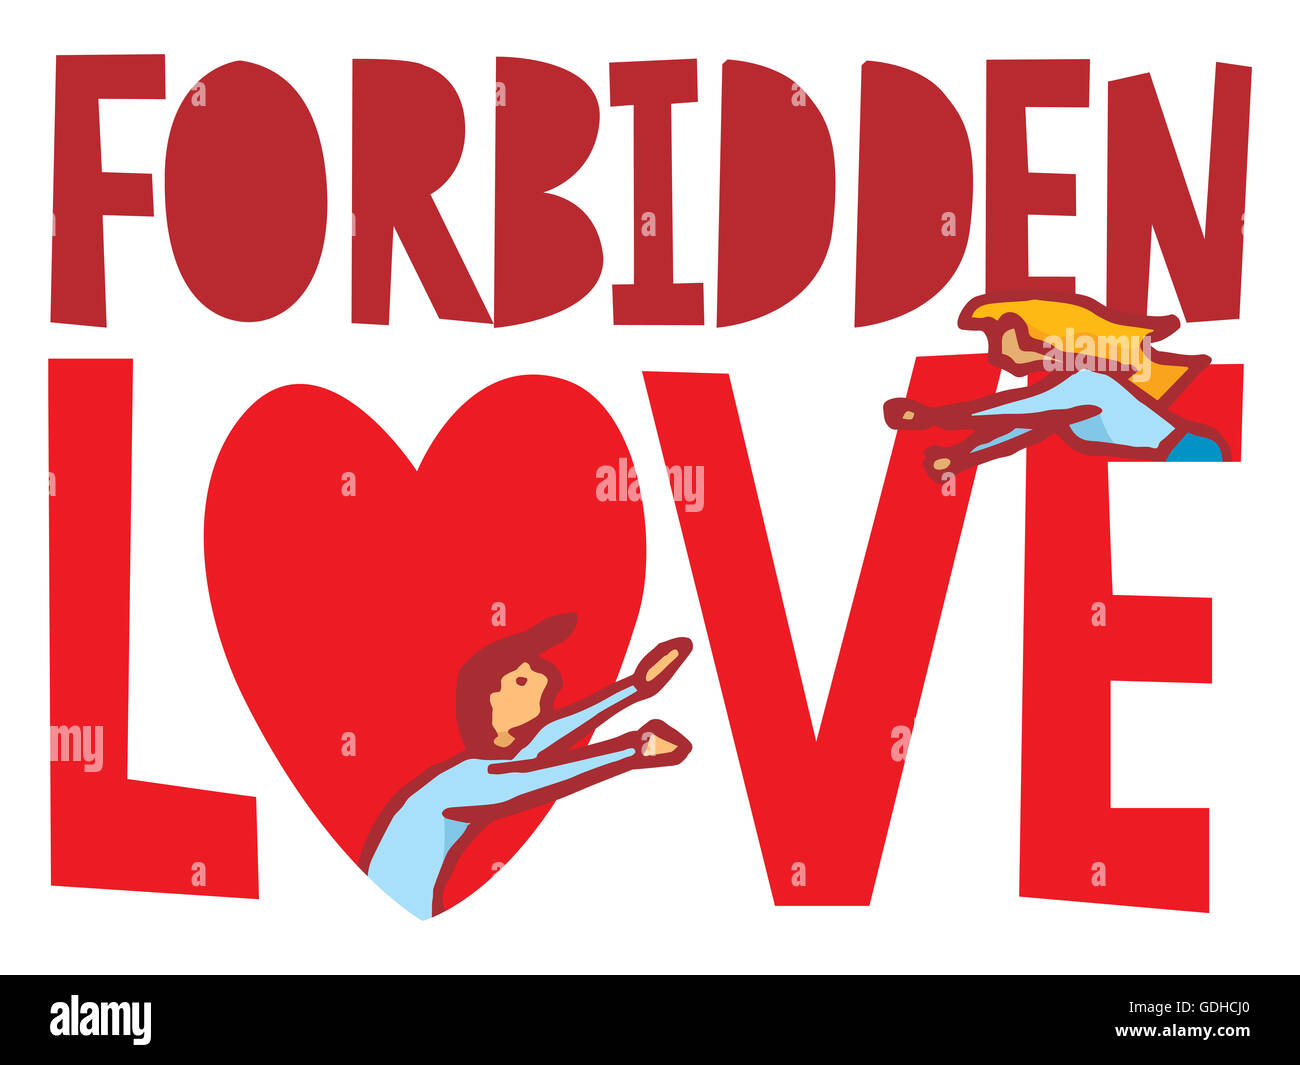 Cartoon illustration of couple in forbidden love struggling to be together Stock Photo